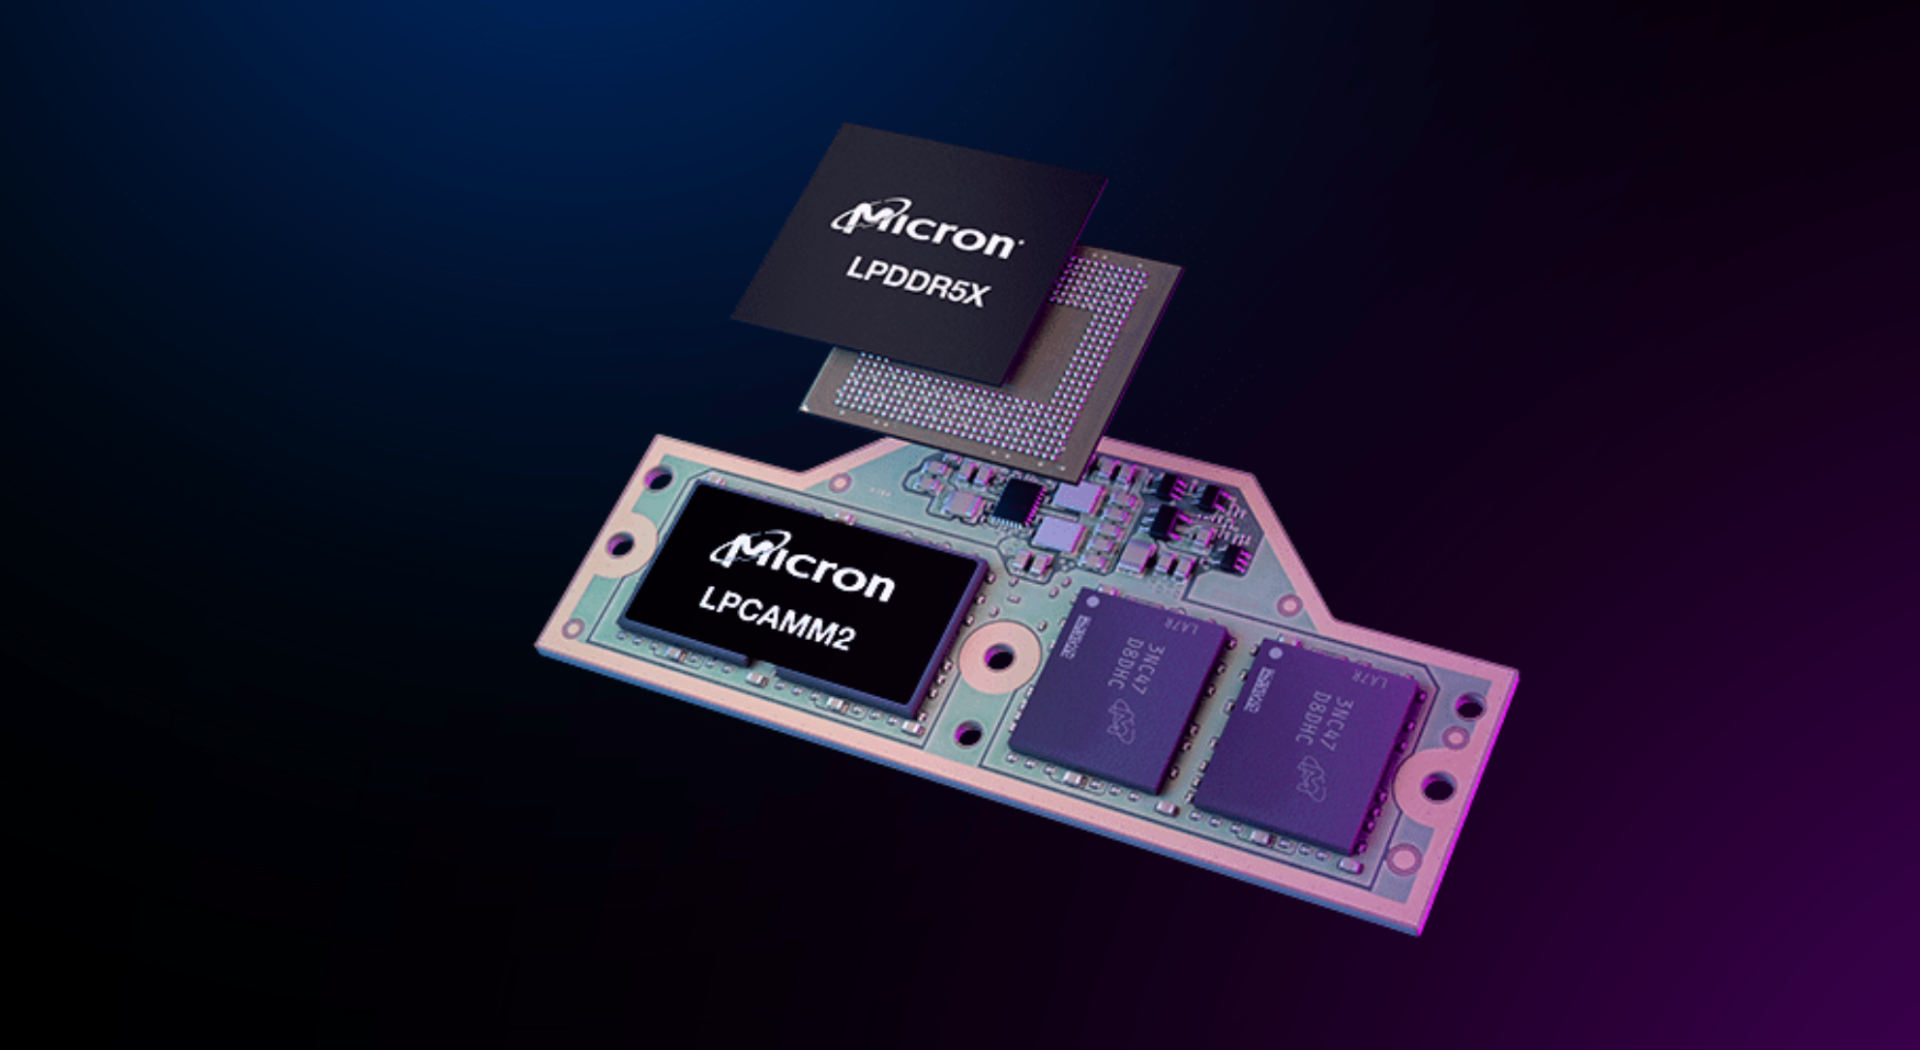 More compact and more powerful CAMM memory modules are coming to desktop PCs